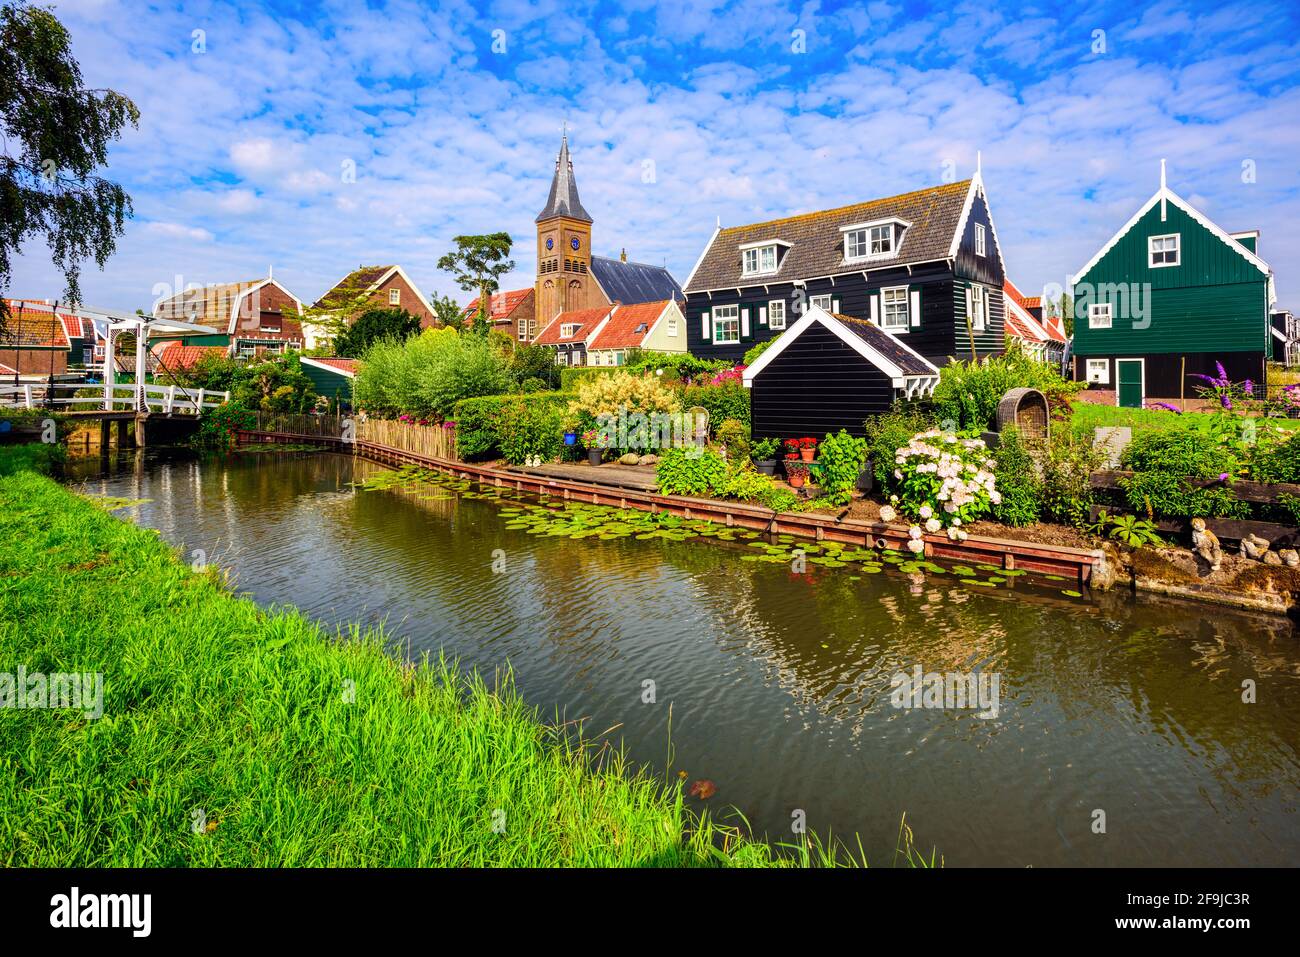 Marken, historical village on Markermeer lake, North Holland, Netherlands, famous for its traditional dutch wooden houses, is a popular tourist destin Stock Photo